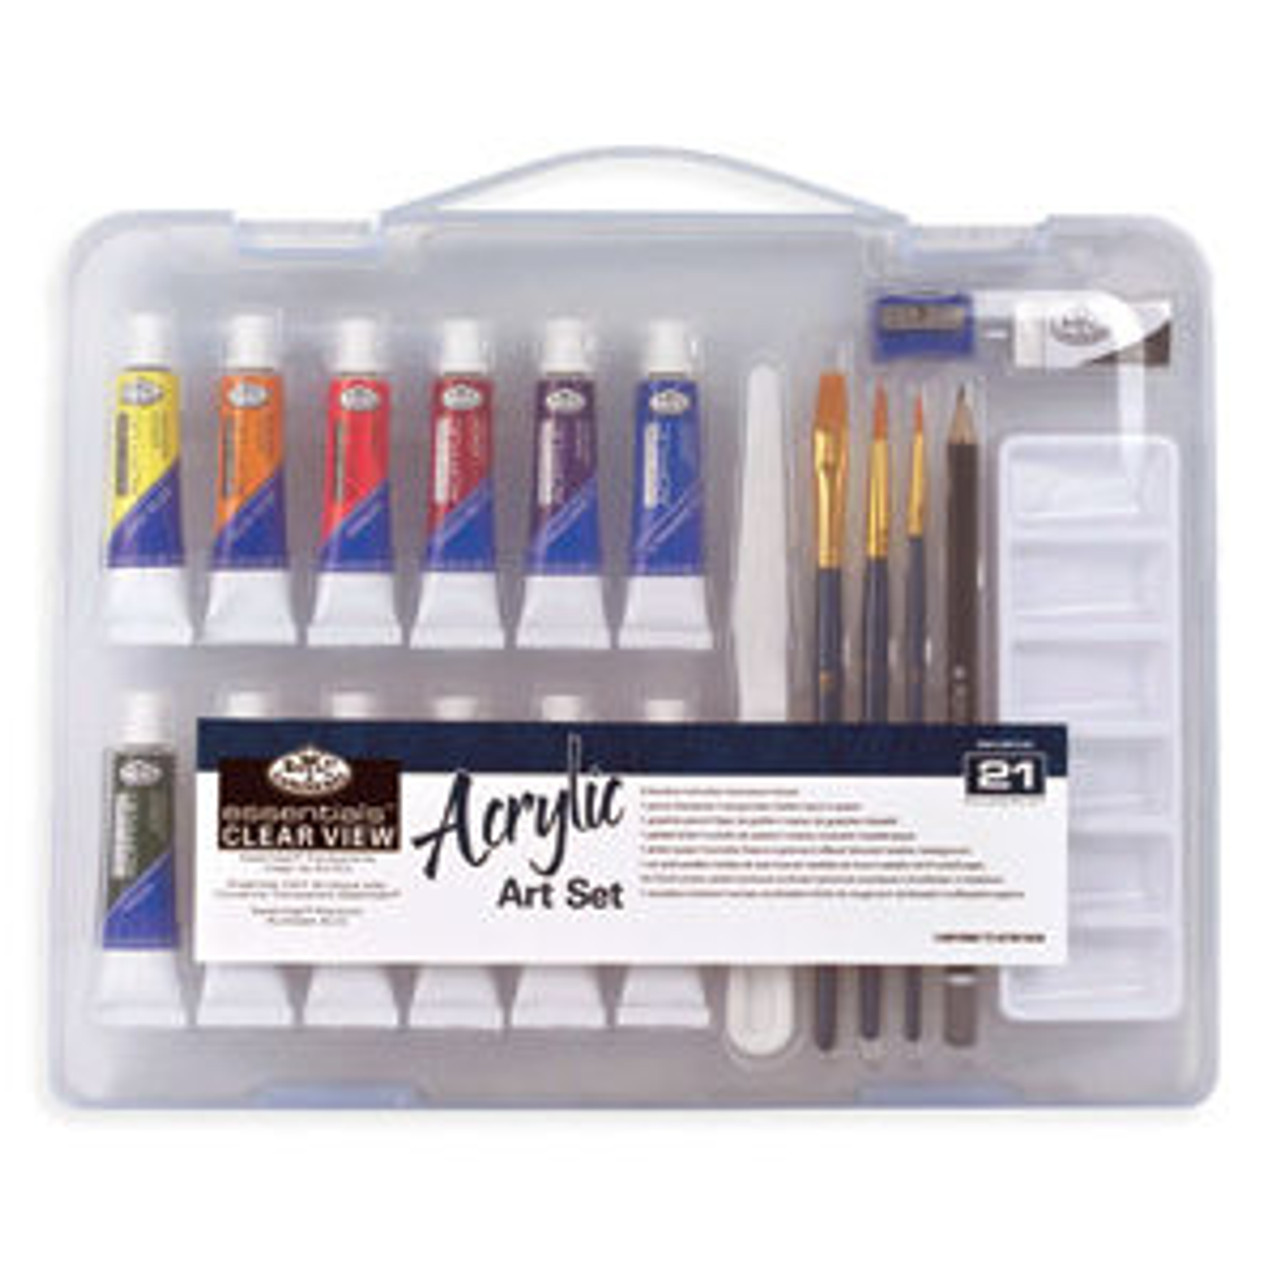 Royal & Langnickel Acrylic Painting Set in a Large Clear View Art Case